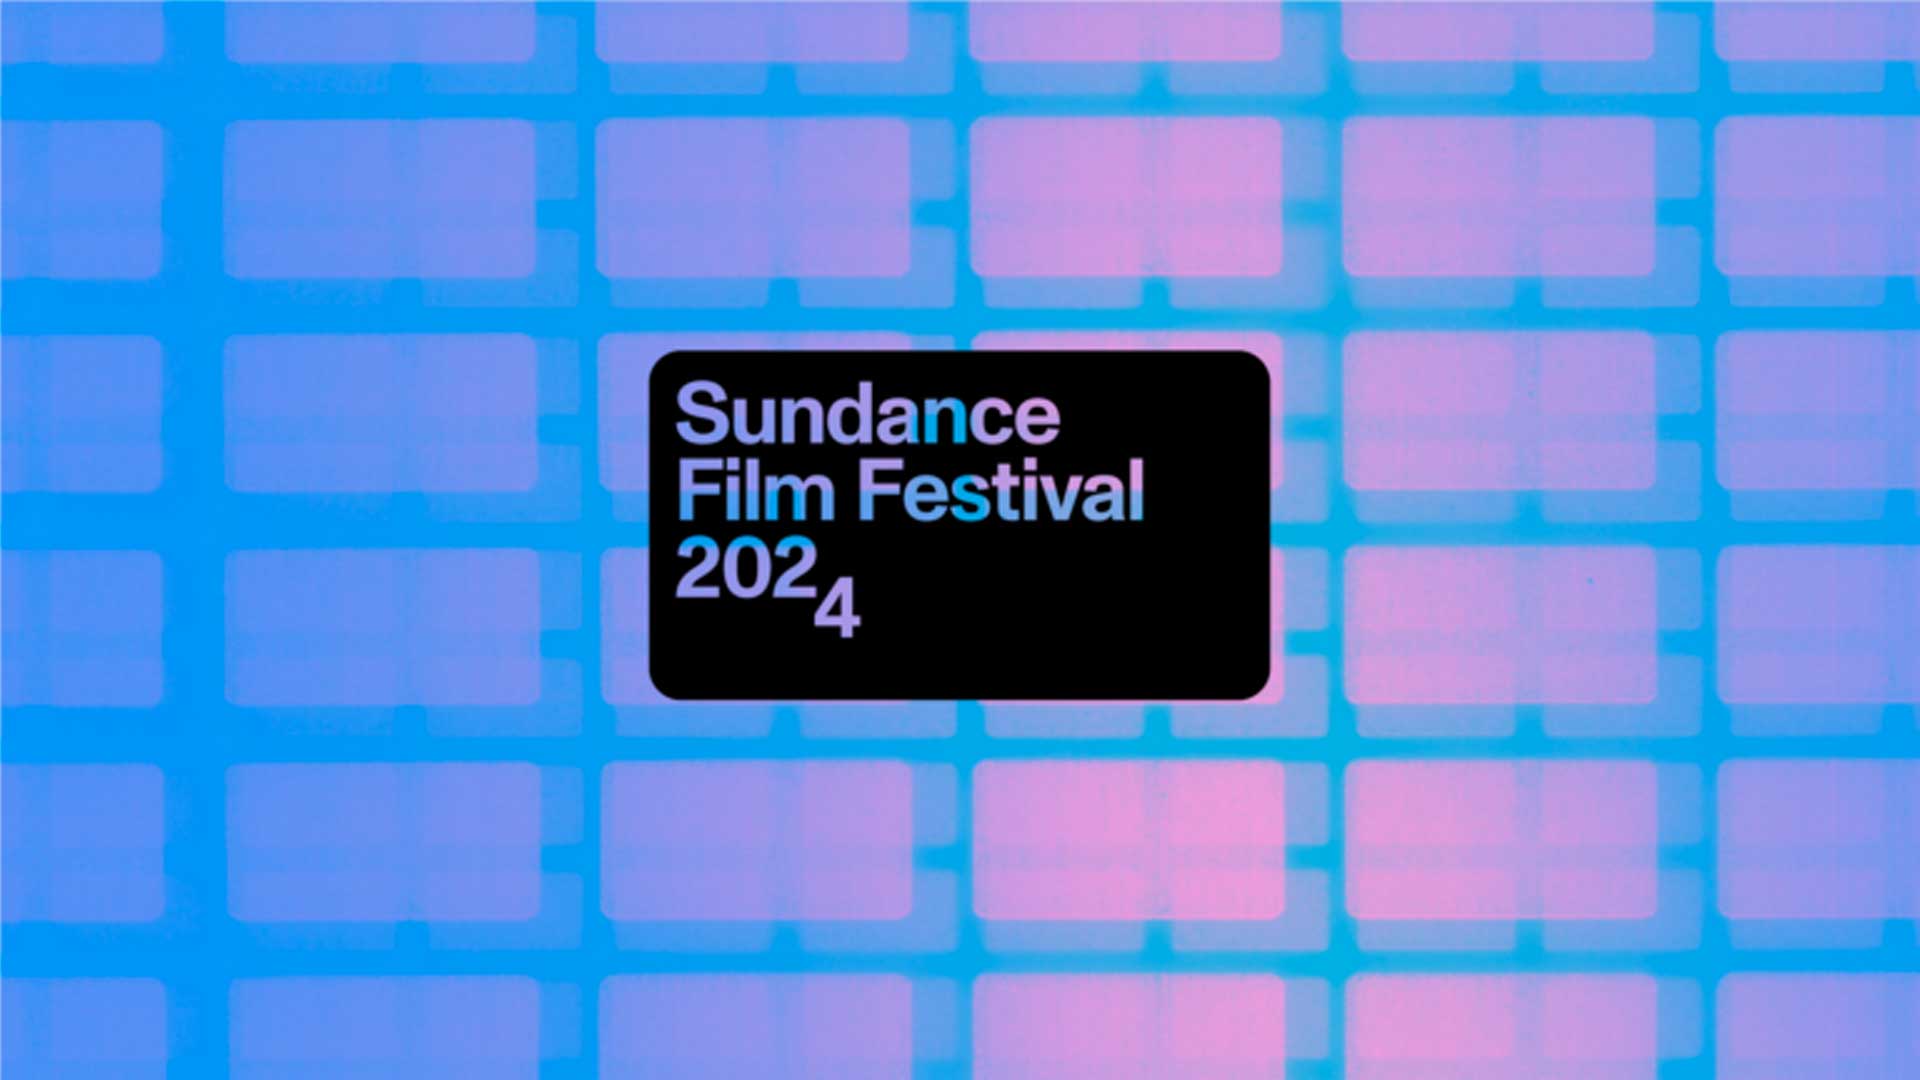 Sundance Film Festival 2024 Logo in black and white - centered over a turquoise and pink grid background